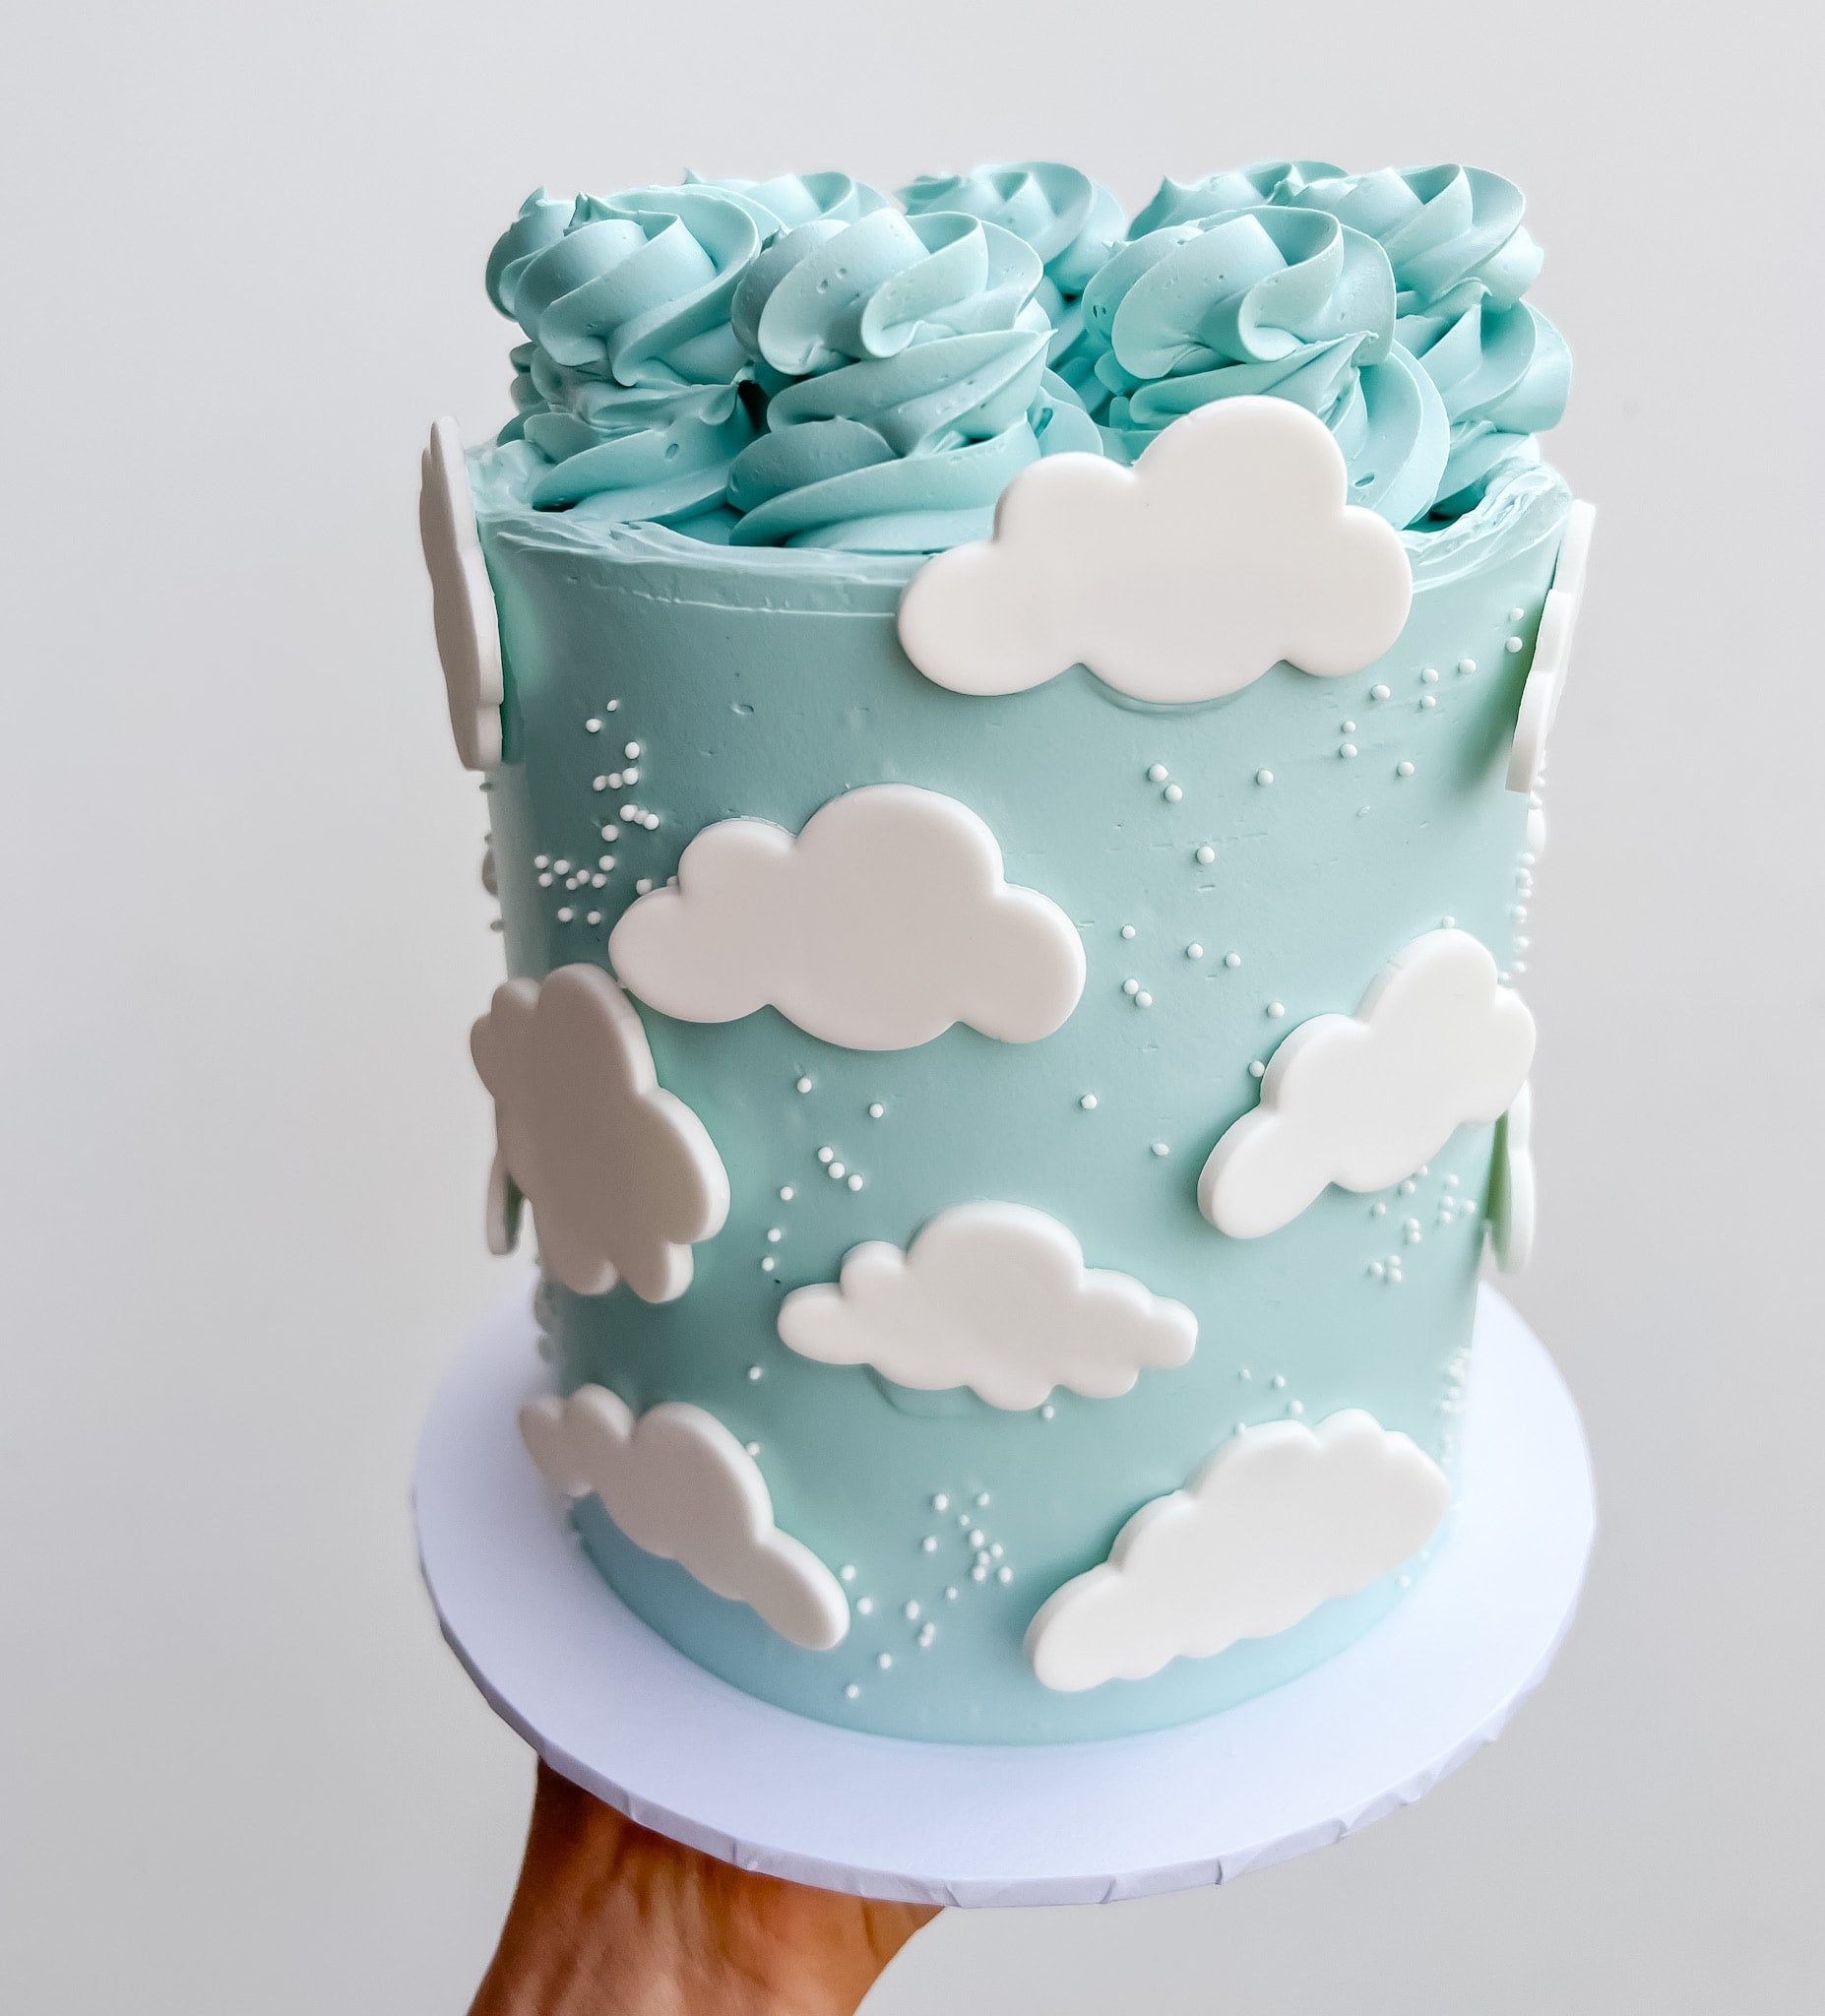 Rainbow Cake with Clouds Recipe: How to Make It